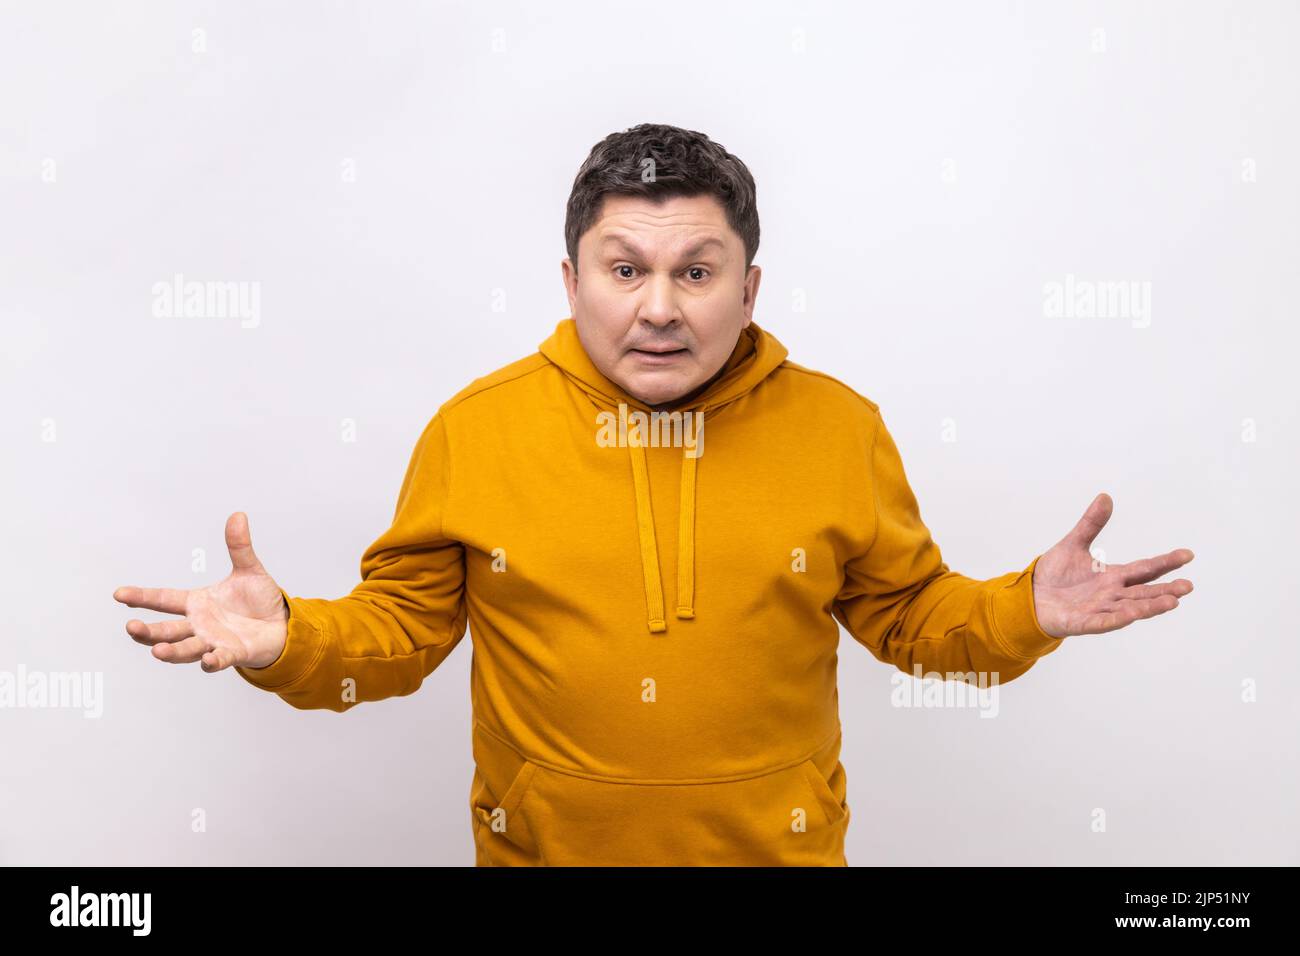 Portrait of angry confused man standing with raised hands and surprised indignant expression, asking why how, what reason, wearing urban style hoodie. Indoor studio shot isolated on white background. Stock Photo